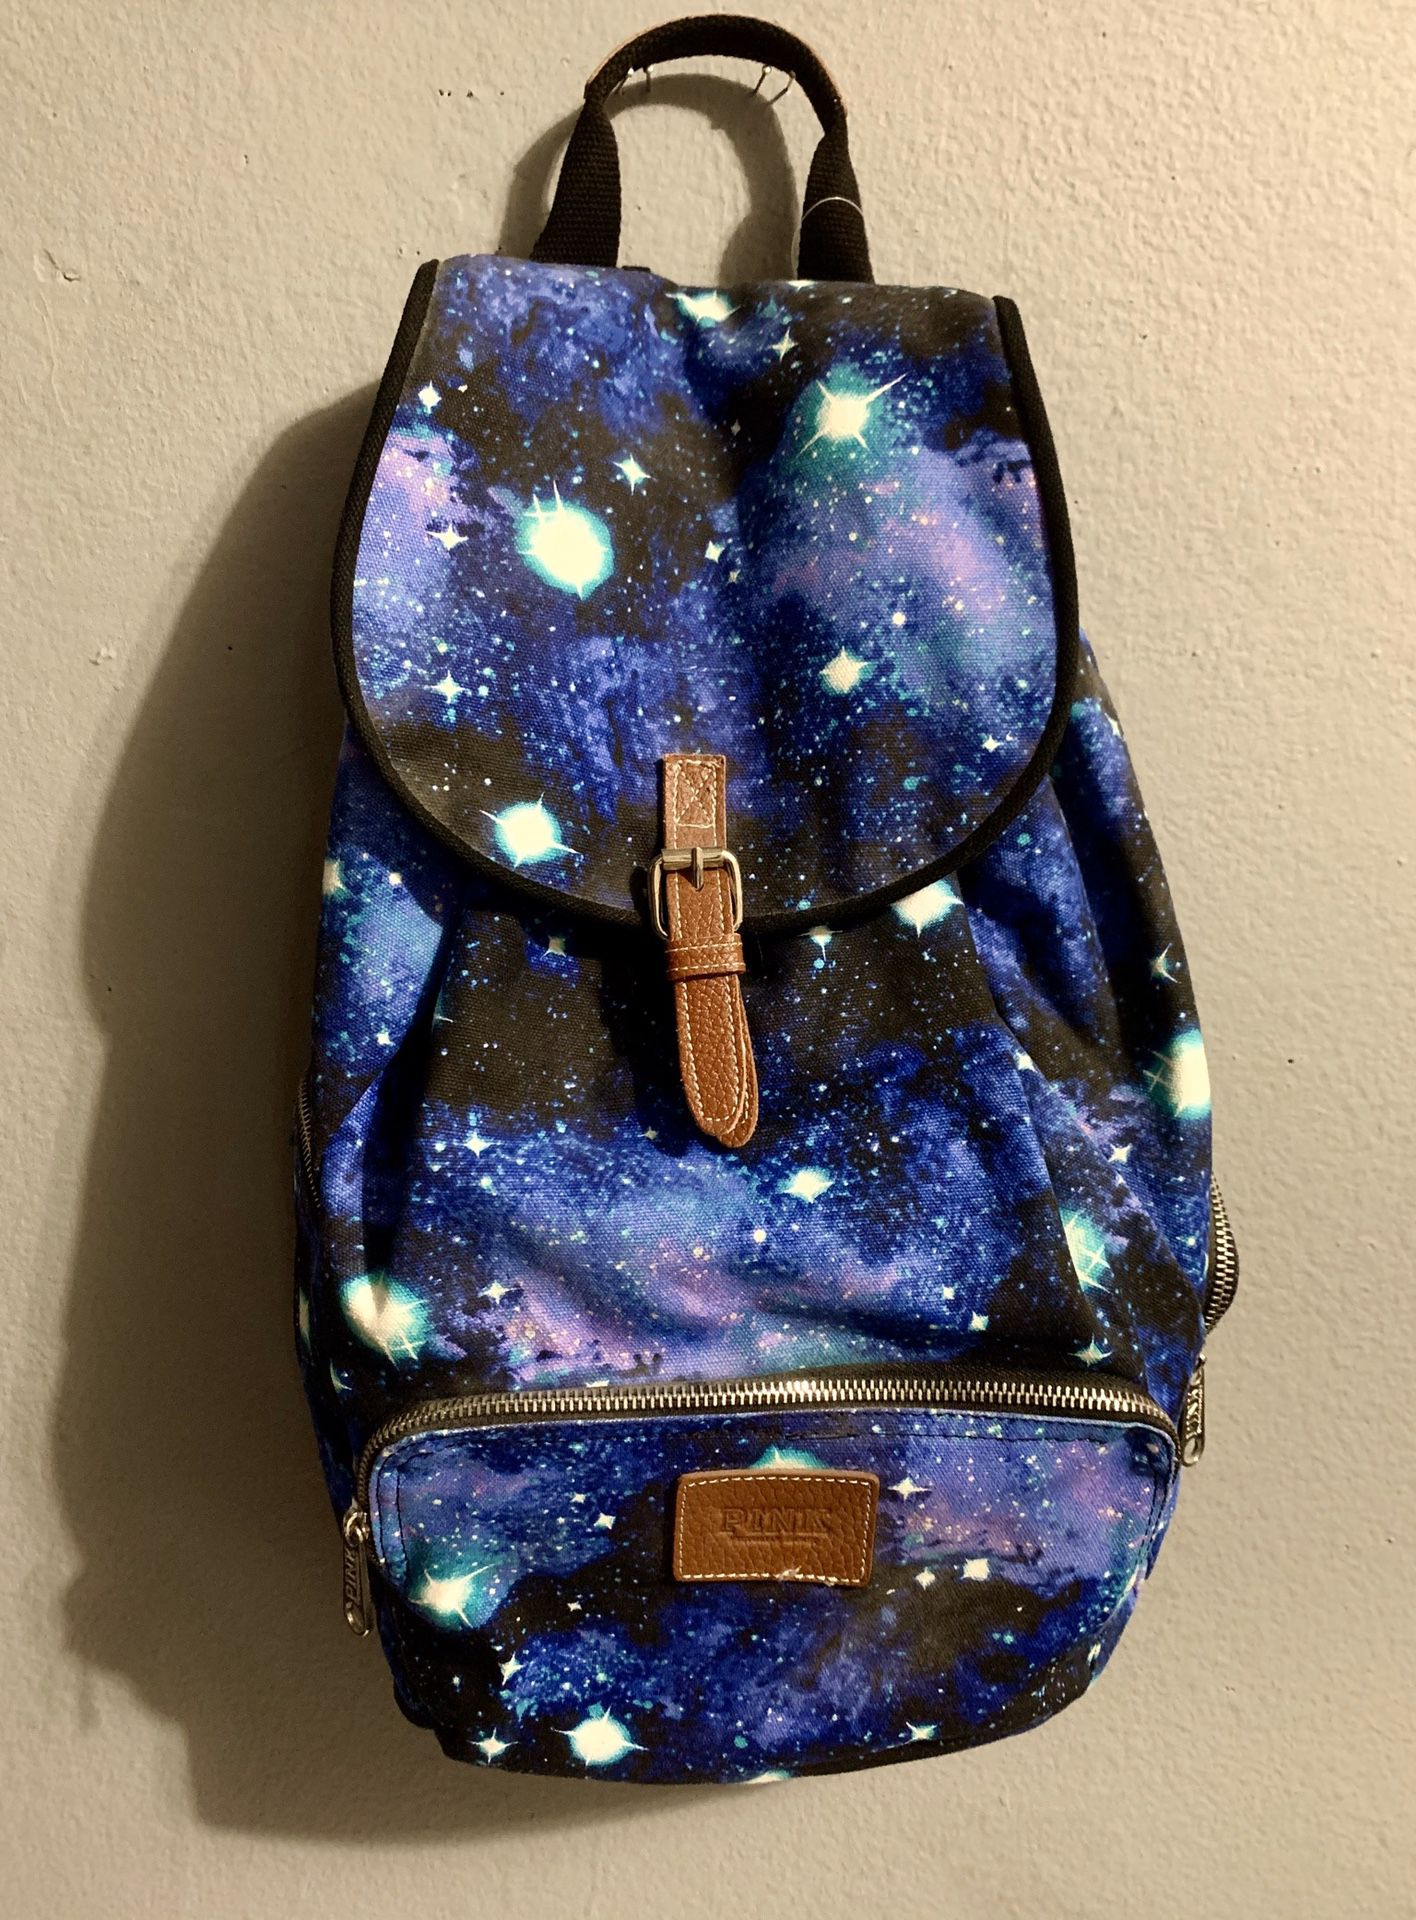 ‘PINK Victoria’s Secret’ Galaxy Backpack